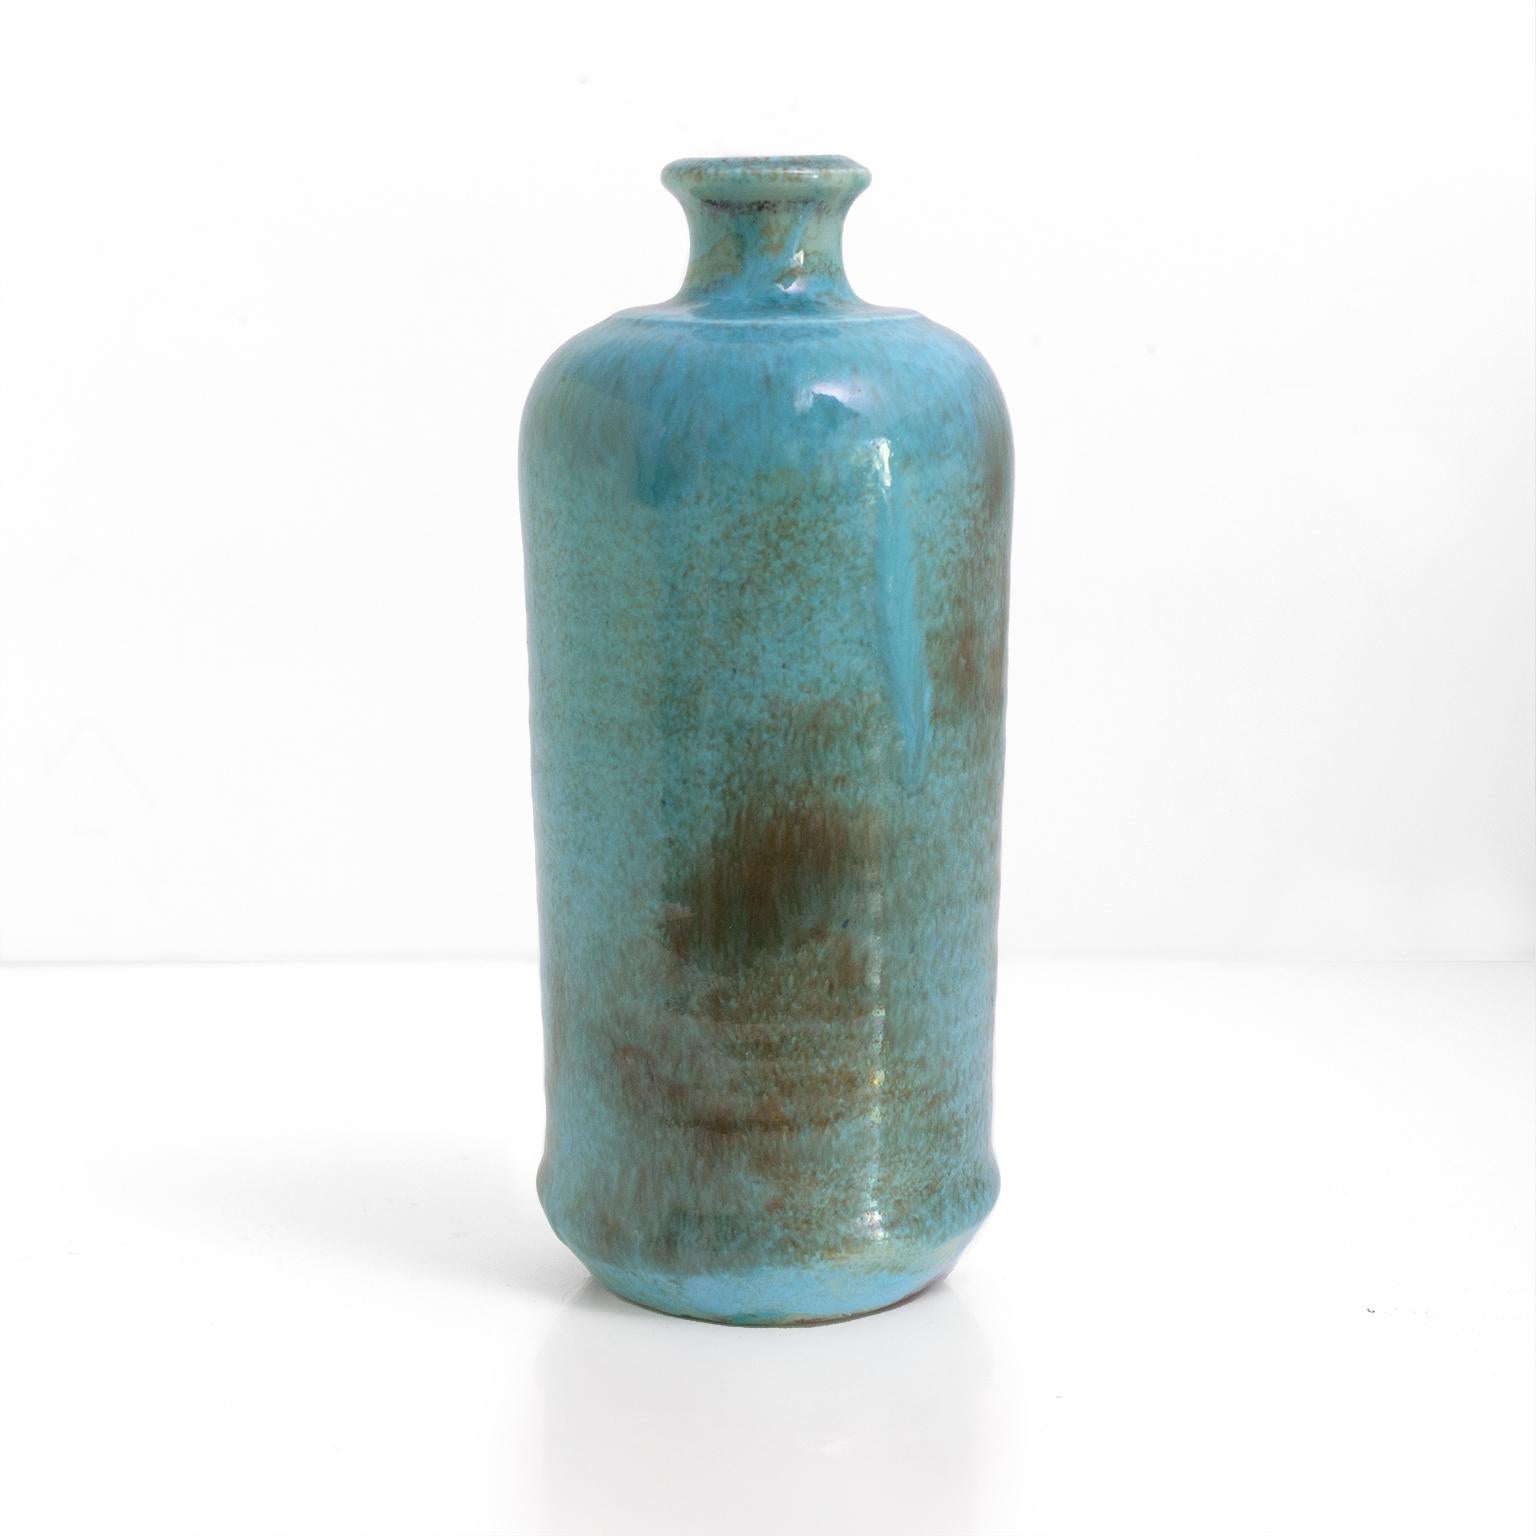 Valentina Modig-Manuel created turquoise ceramic bud vase, from 1952, produced at Studio Keramos, Finland, signed “WC 52’.

Measures: Height: 8.5” Diameter: 4”.